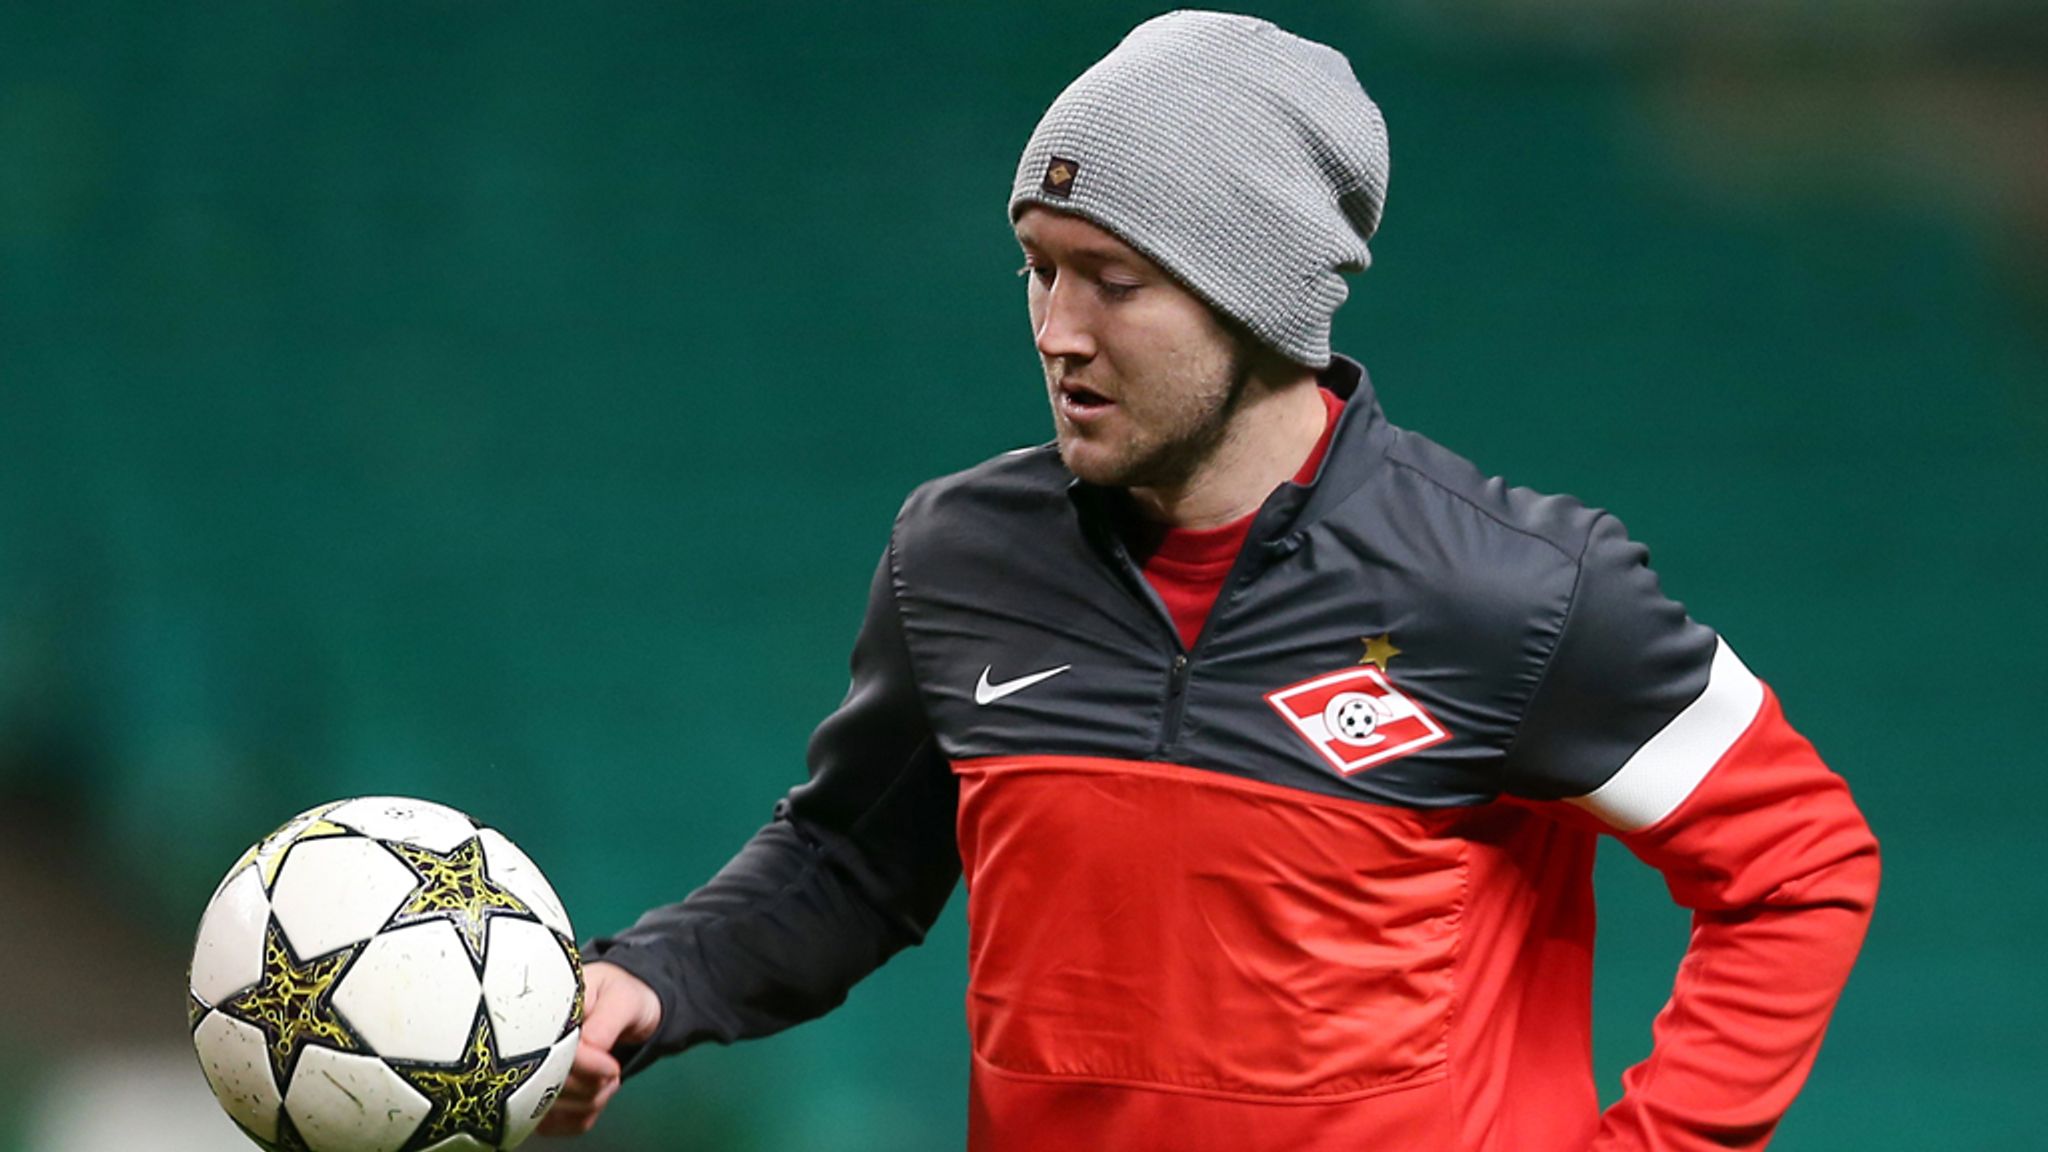 Spartak Moscow discipline Aiden McGeady for disobeying team orders, Football News